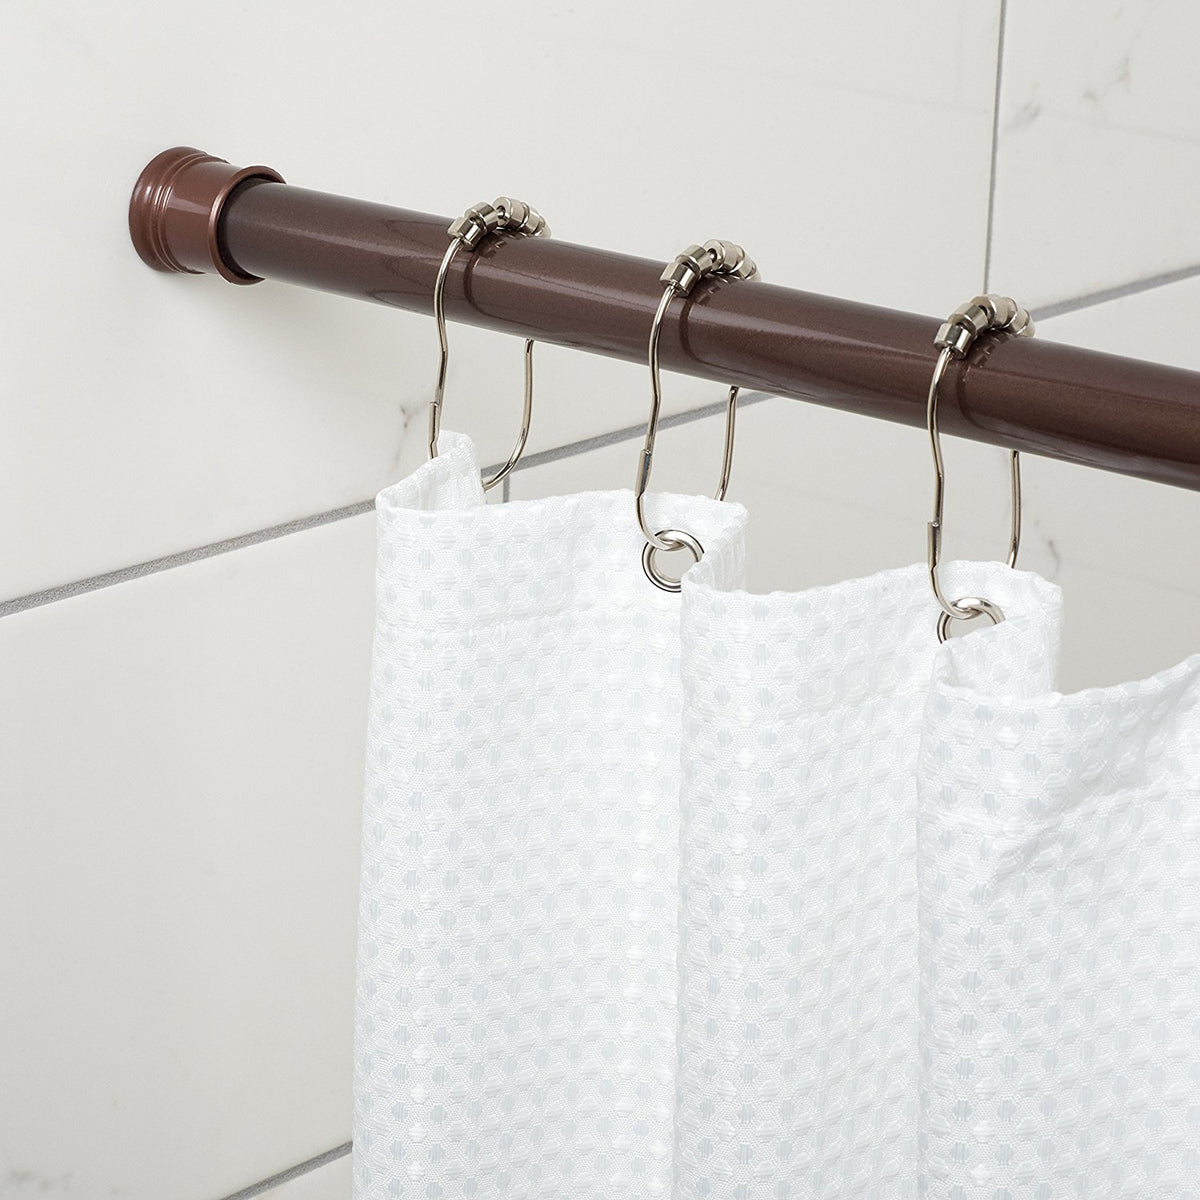 Zenna Home 506RB Shower Curtain Rod, Oil Rubbed Bronze, 42 inches - 72 inches